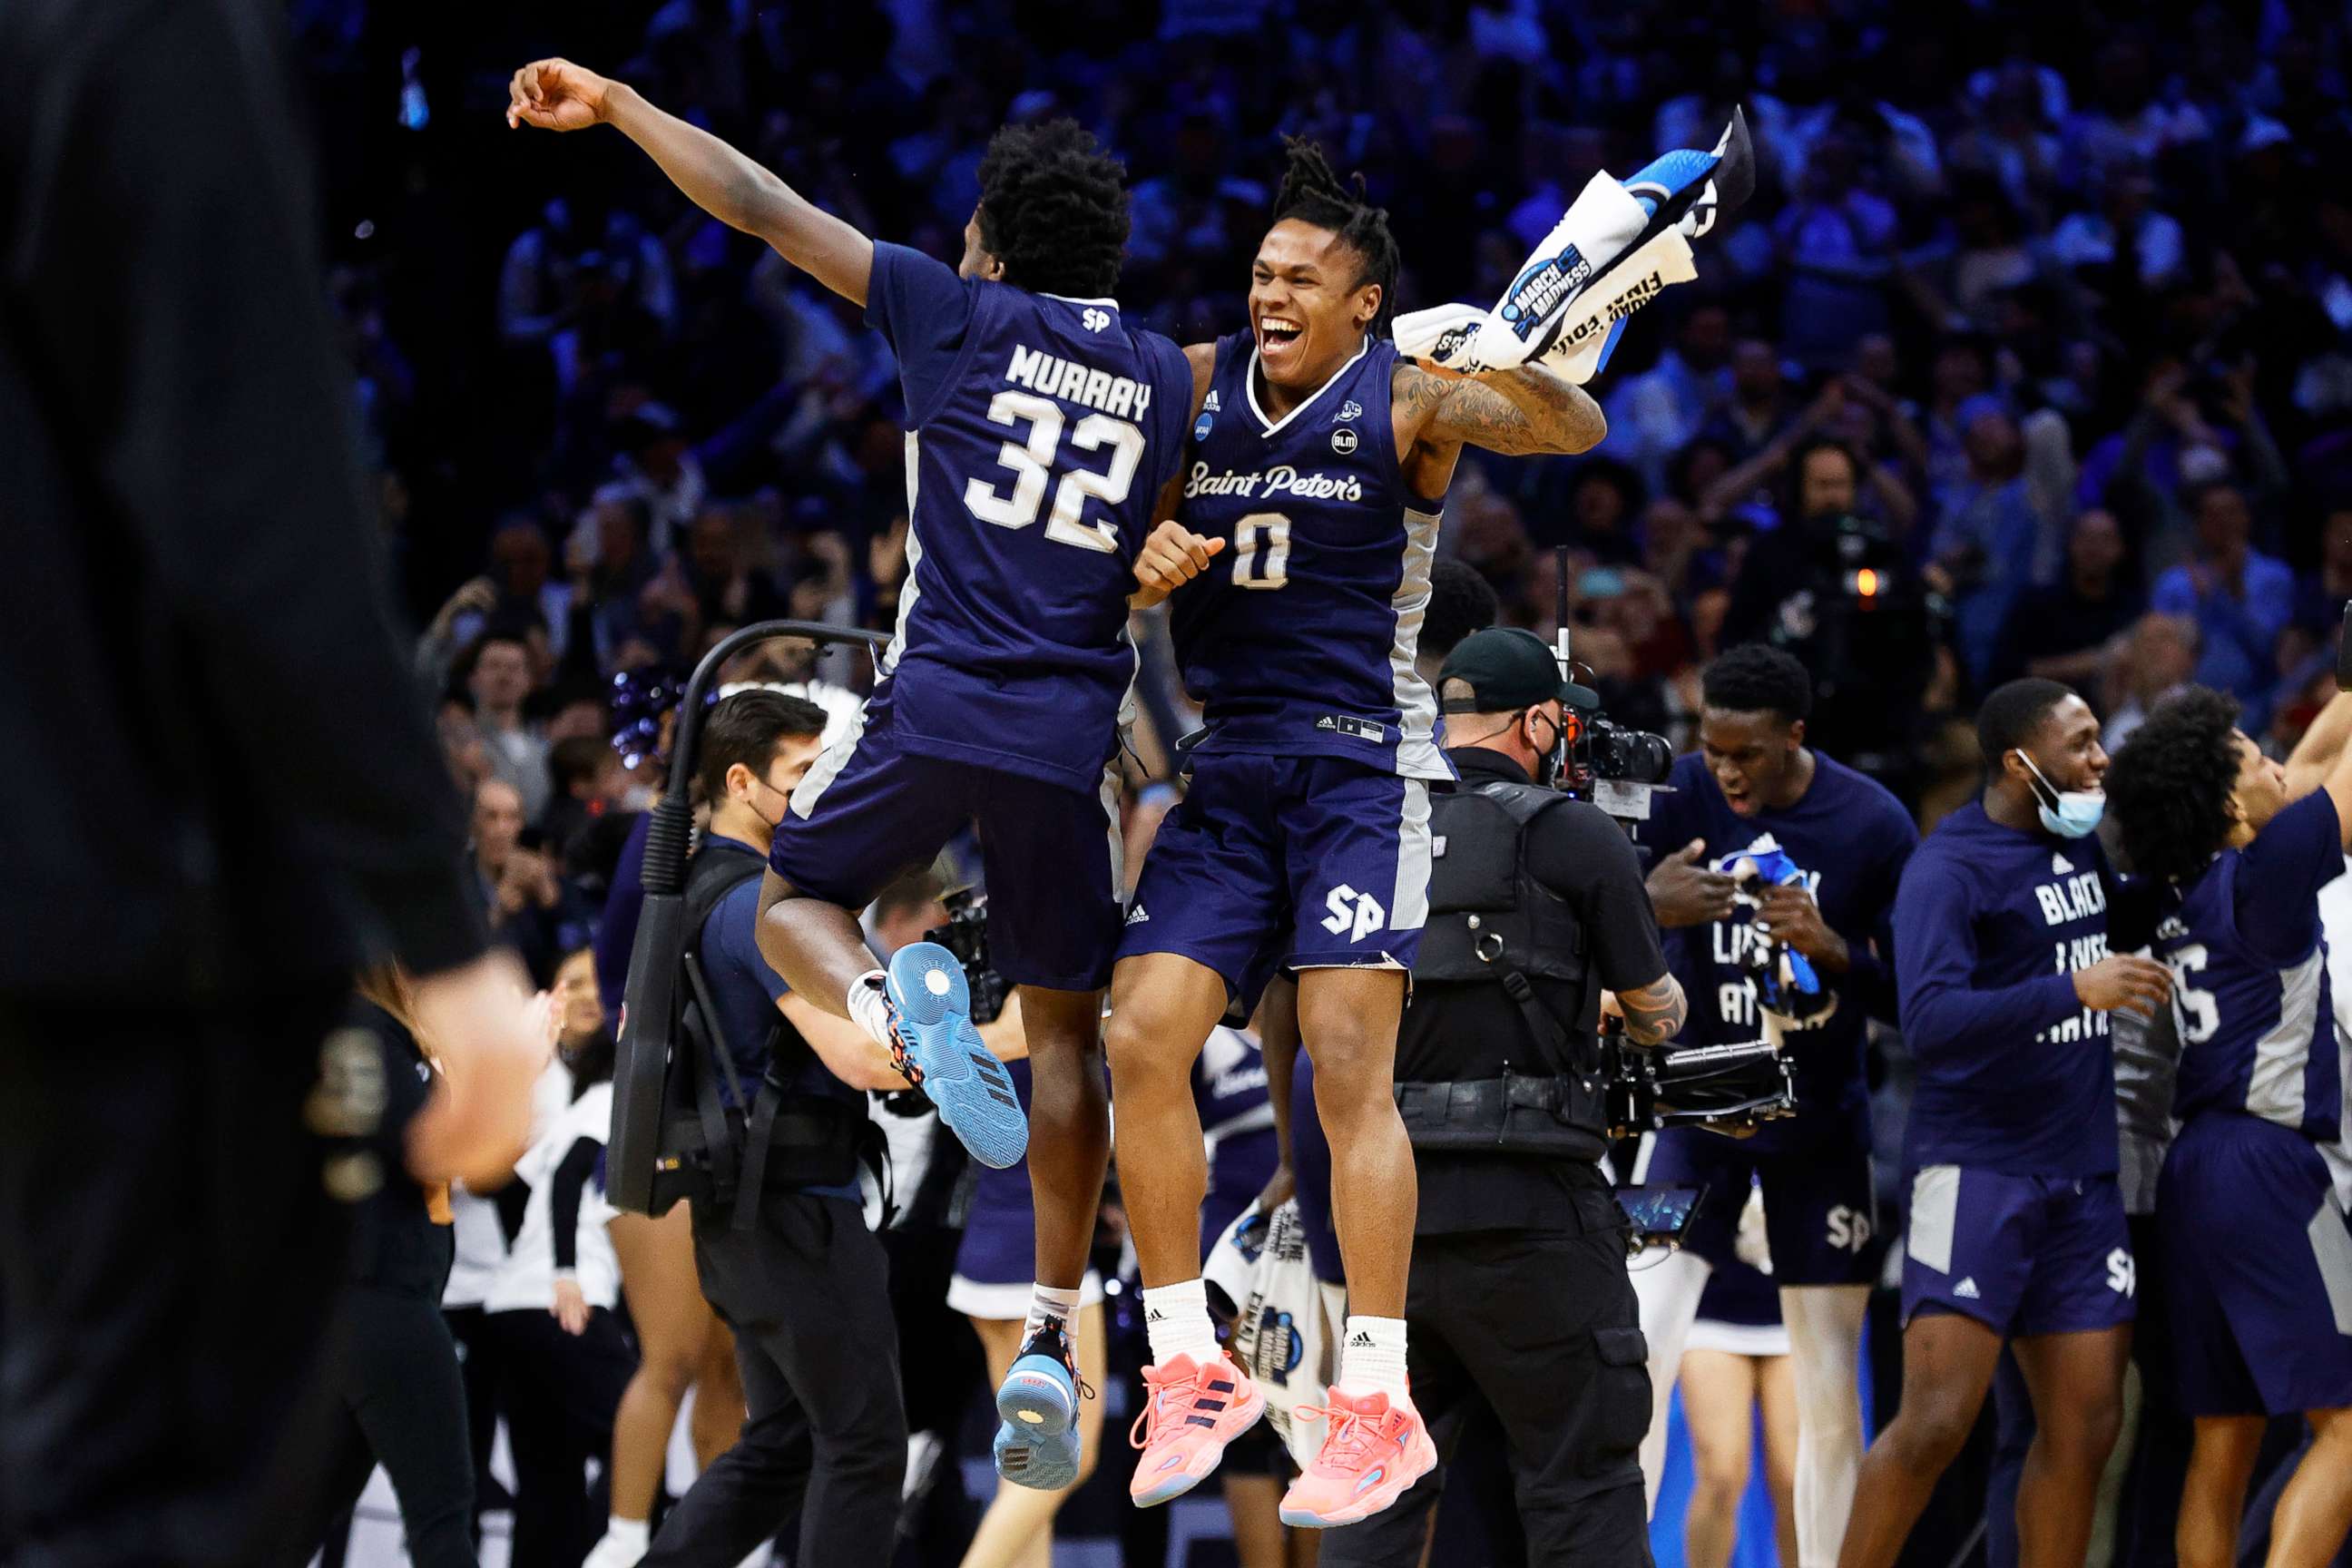 PHOTO: Jaylen Murray #32 and Latrell Reid #0 of the St. Peter's Peacocks celebrate after defeating the Purdue Boilermakers 67-64 in the Sweet Sixteen round game of the 2022 NCAA Men's Basketball Tournament on March 25, 2022, in Philadelphia.